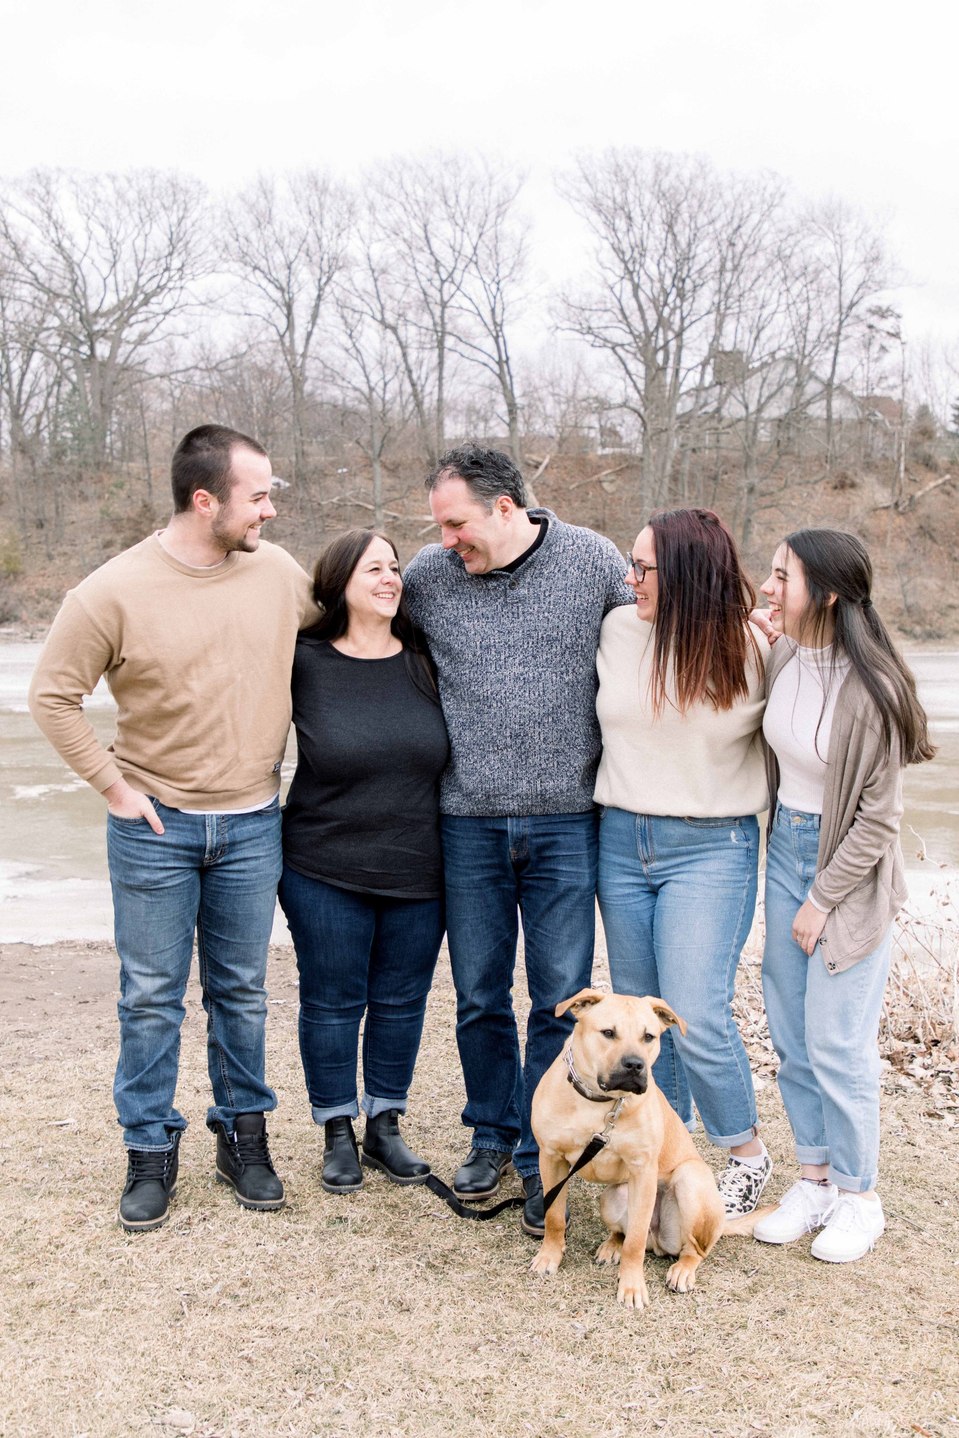 Family photo with dog by the water, Niagara family photographer, family photography, Niagara portrait photographer, portrait photography, Emily VanderBeek Photography.